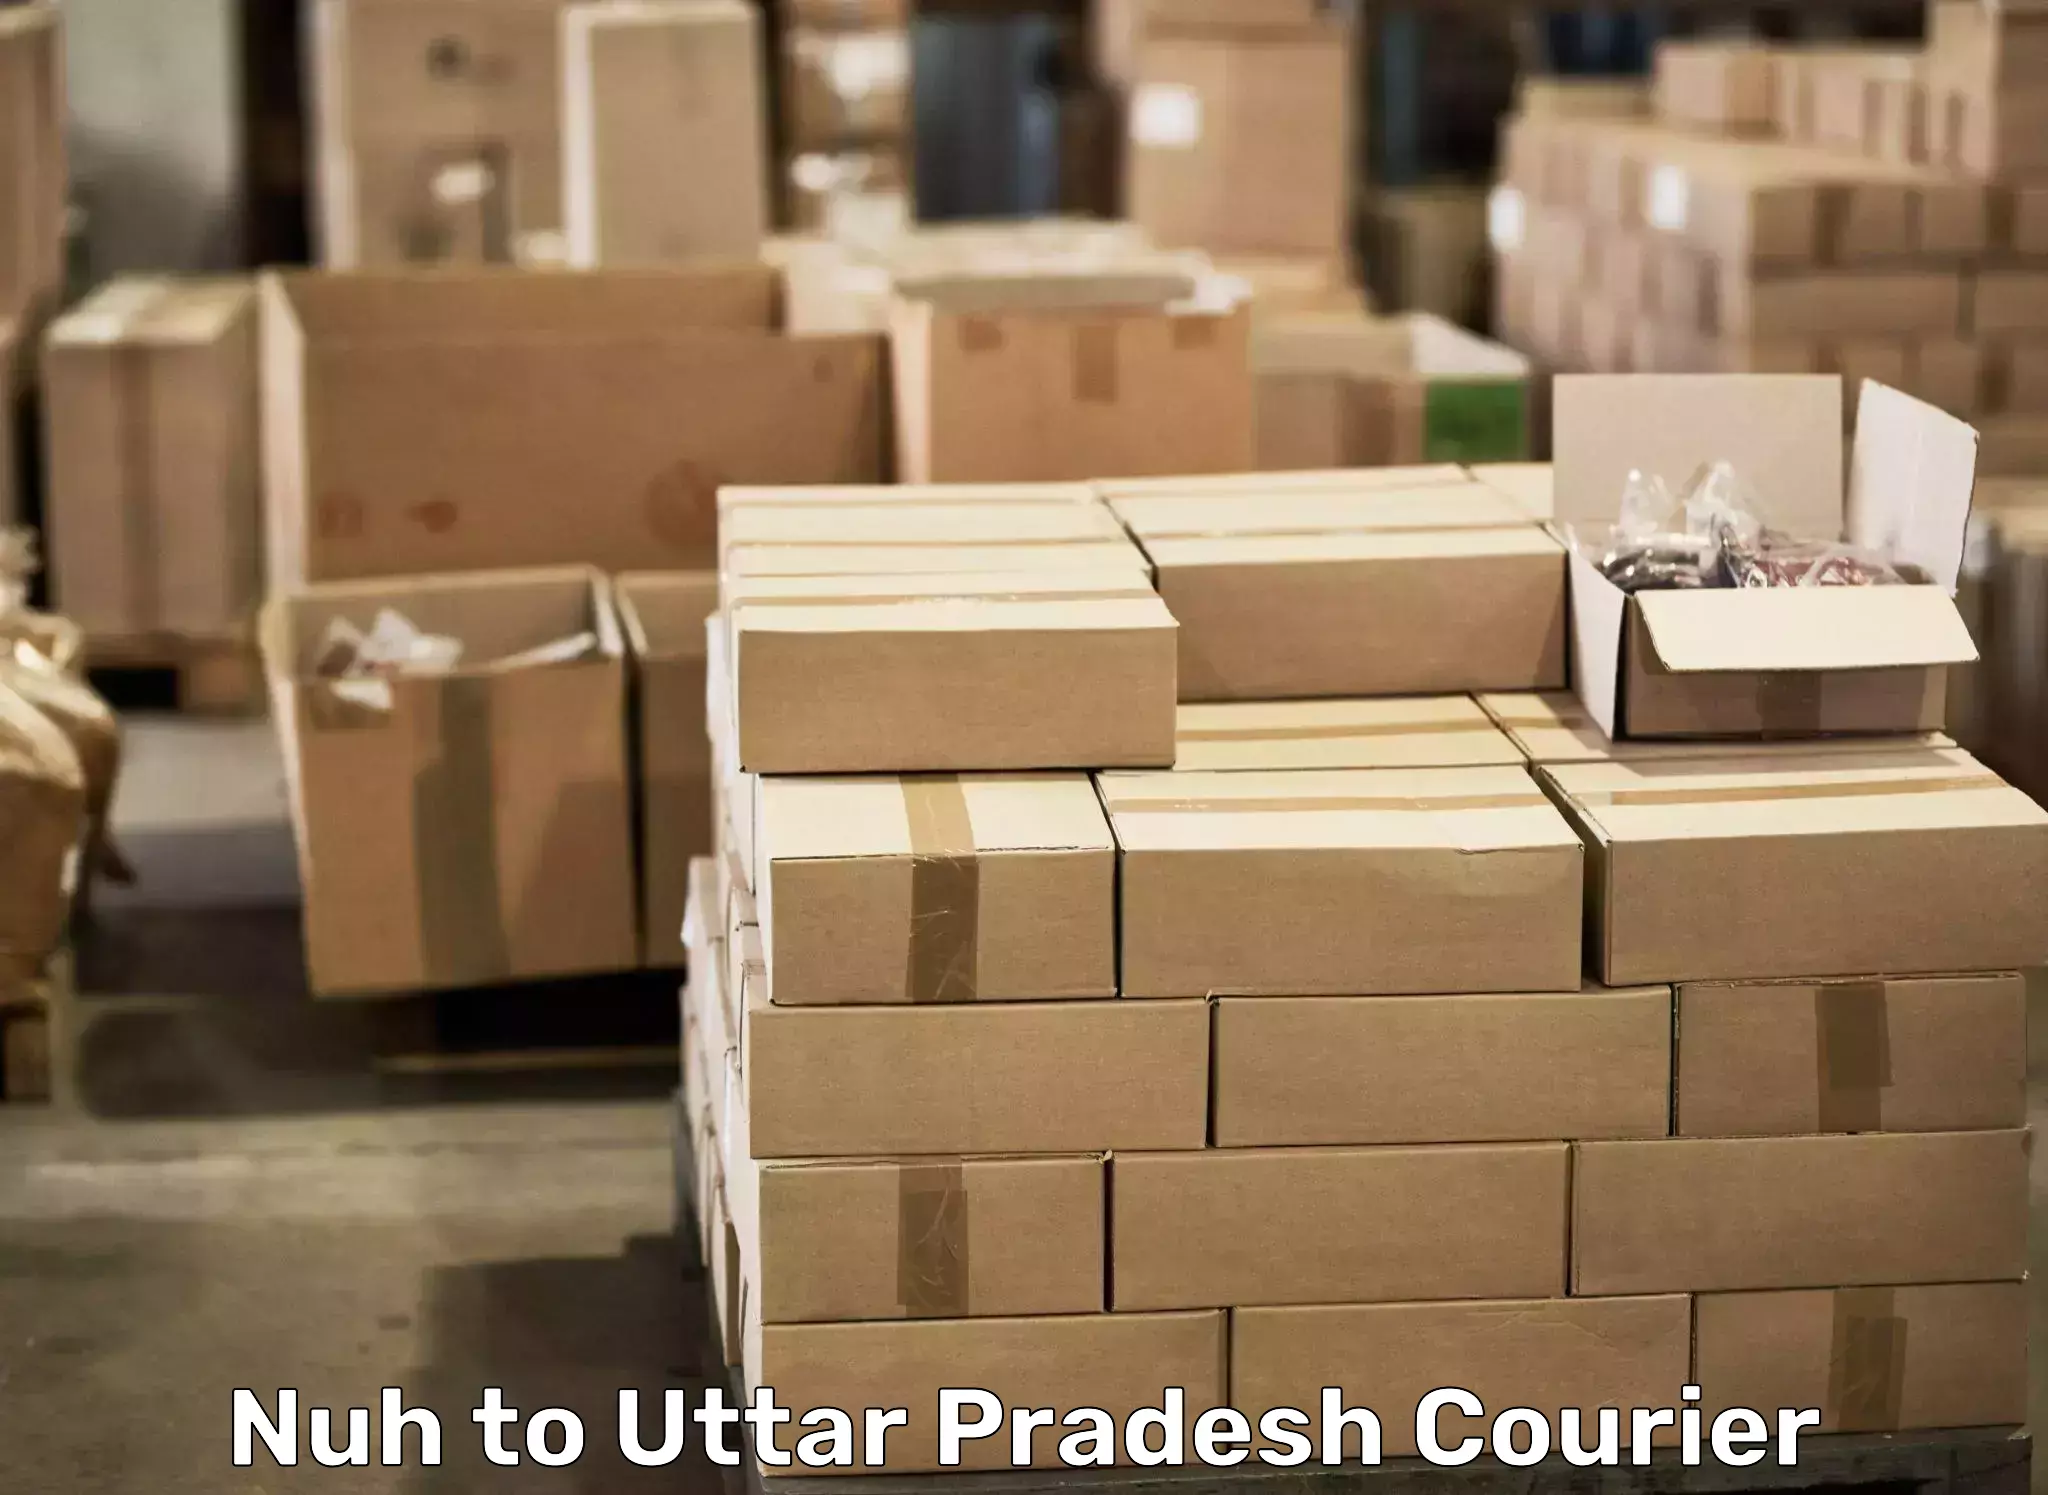 Furniture delivery service Nuh to Amethi